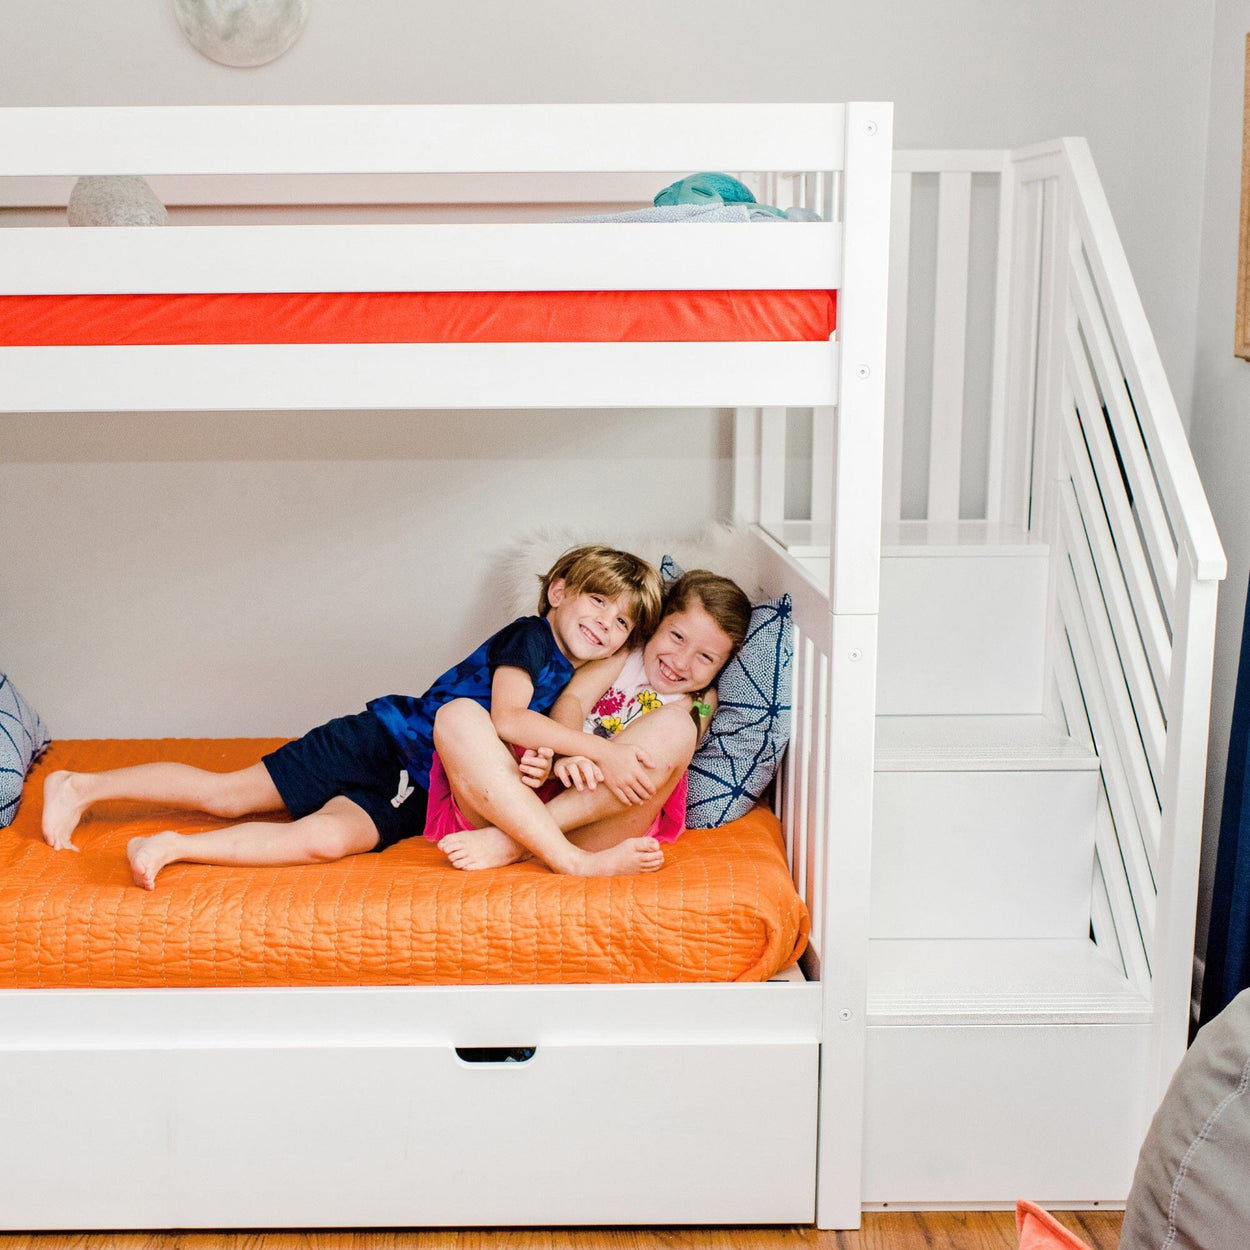 186205-002 : Bunk Beds Twin over Twin Staircase Bunk with Trundle, White